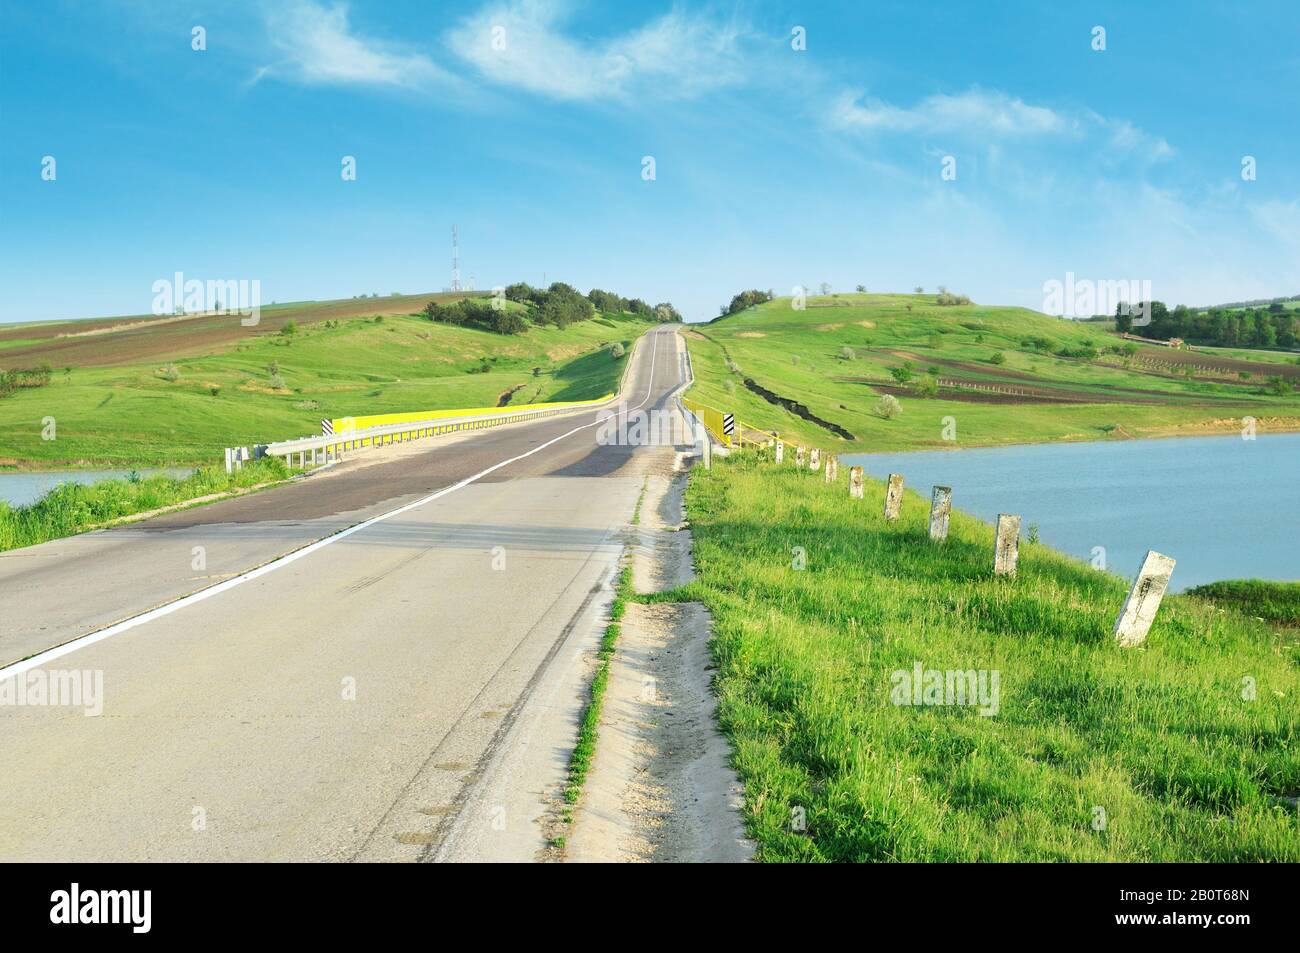 Highway in hilly terrain Stock Photo